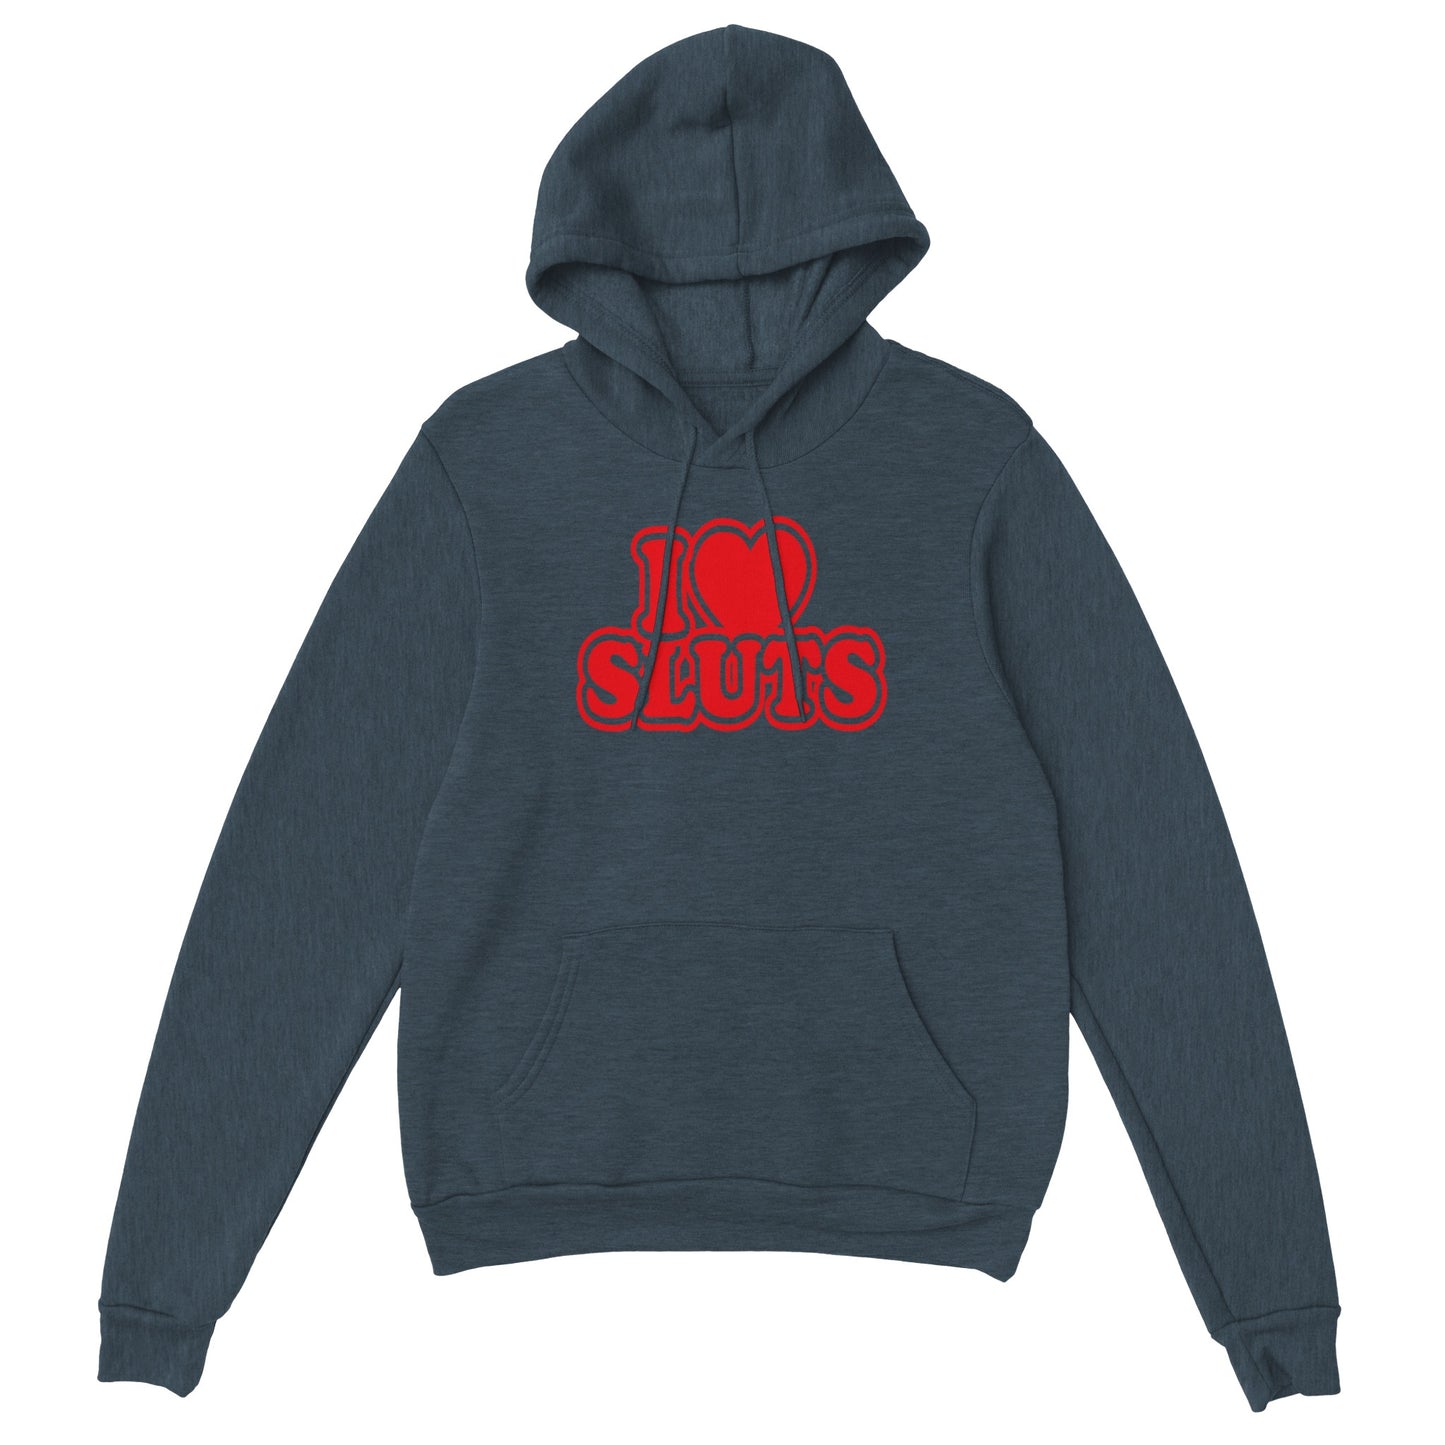 I Love Sluts - Classic Unisex Pullover Hoodie - Mister Snarky's